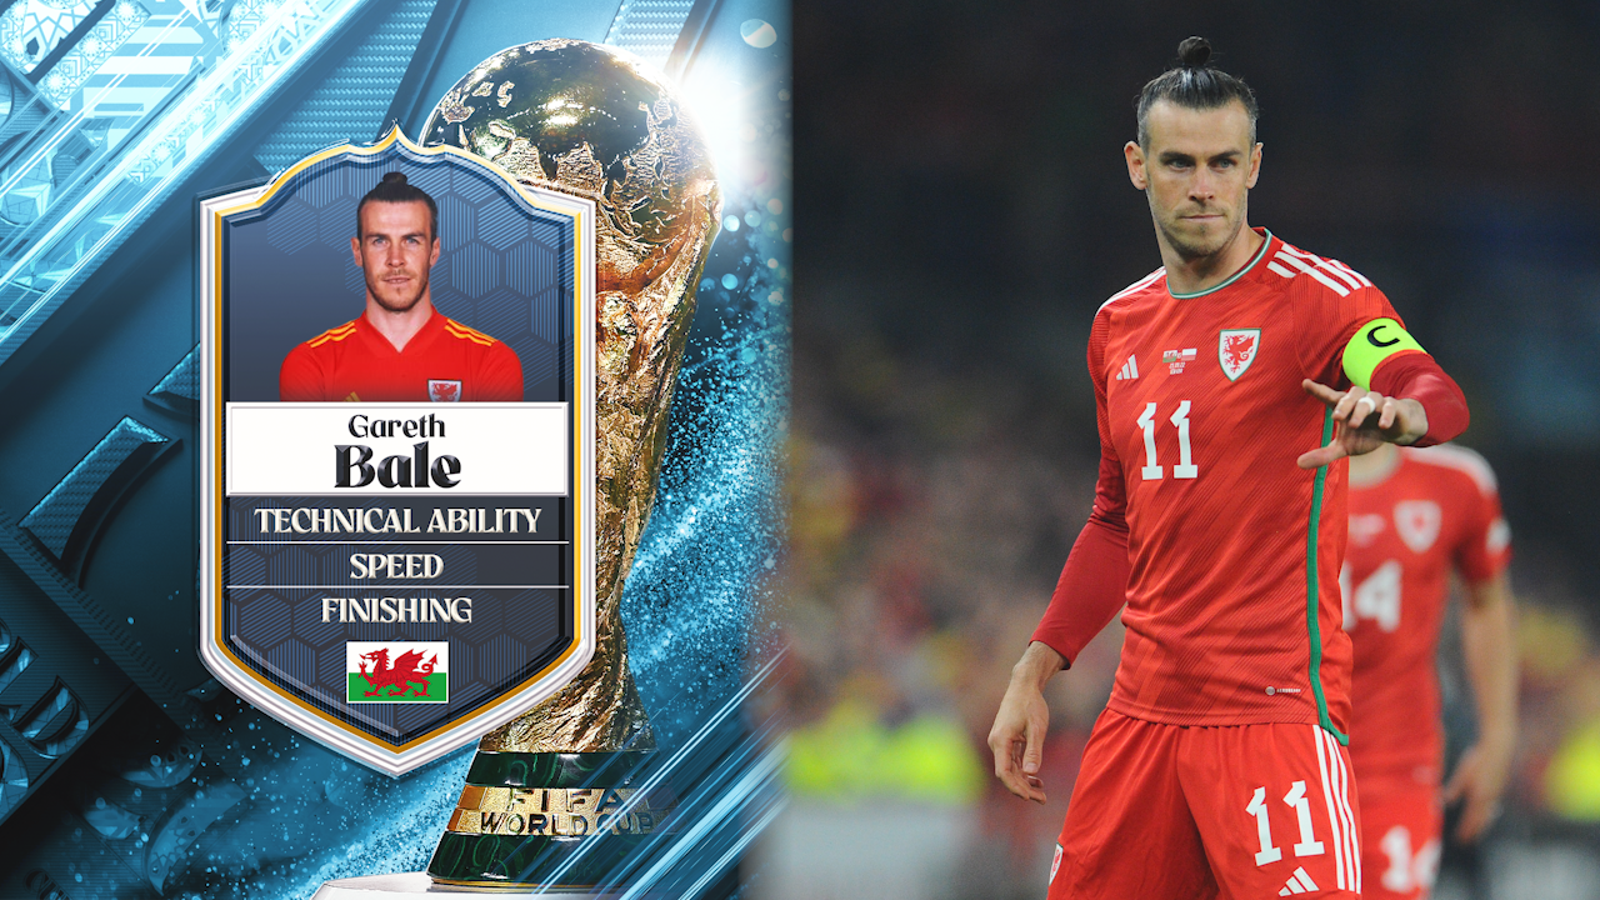 2022 World Cup: USMNT can't afford to overlook Gareth Bales and Wales